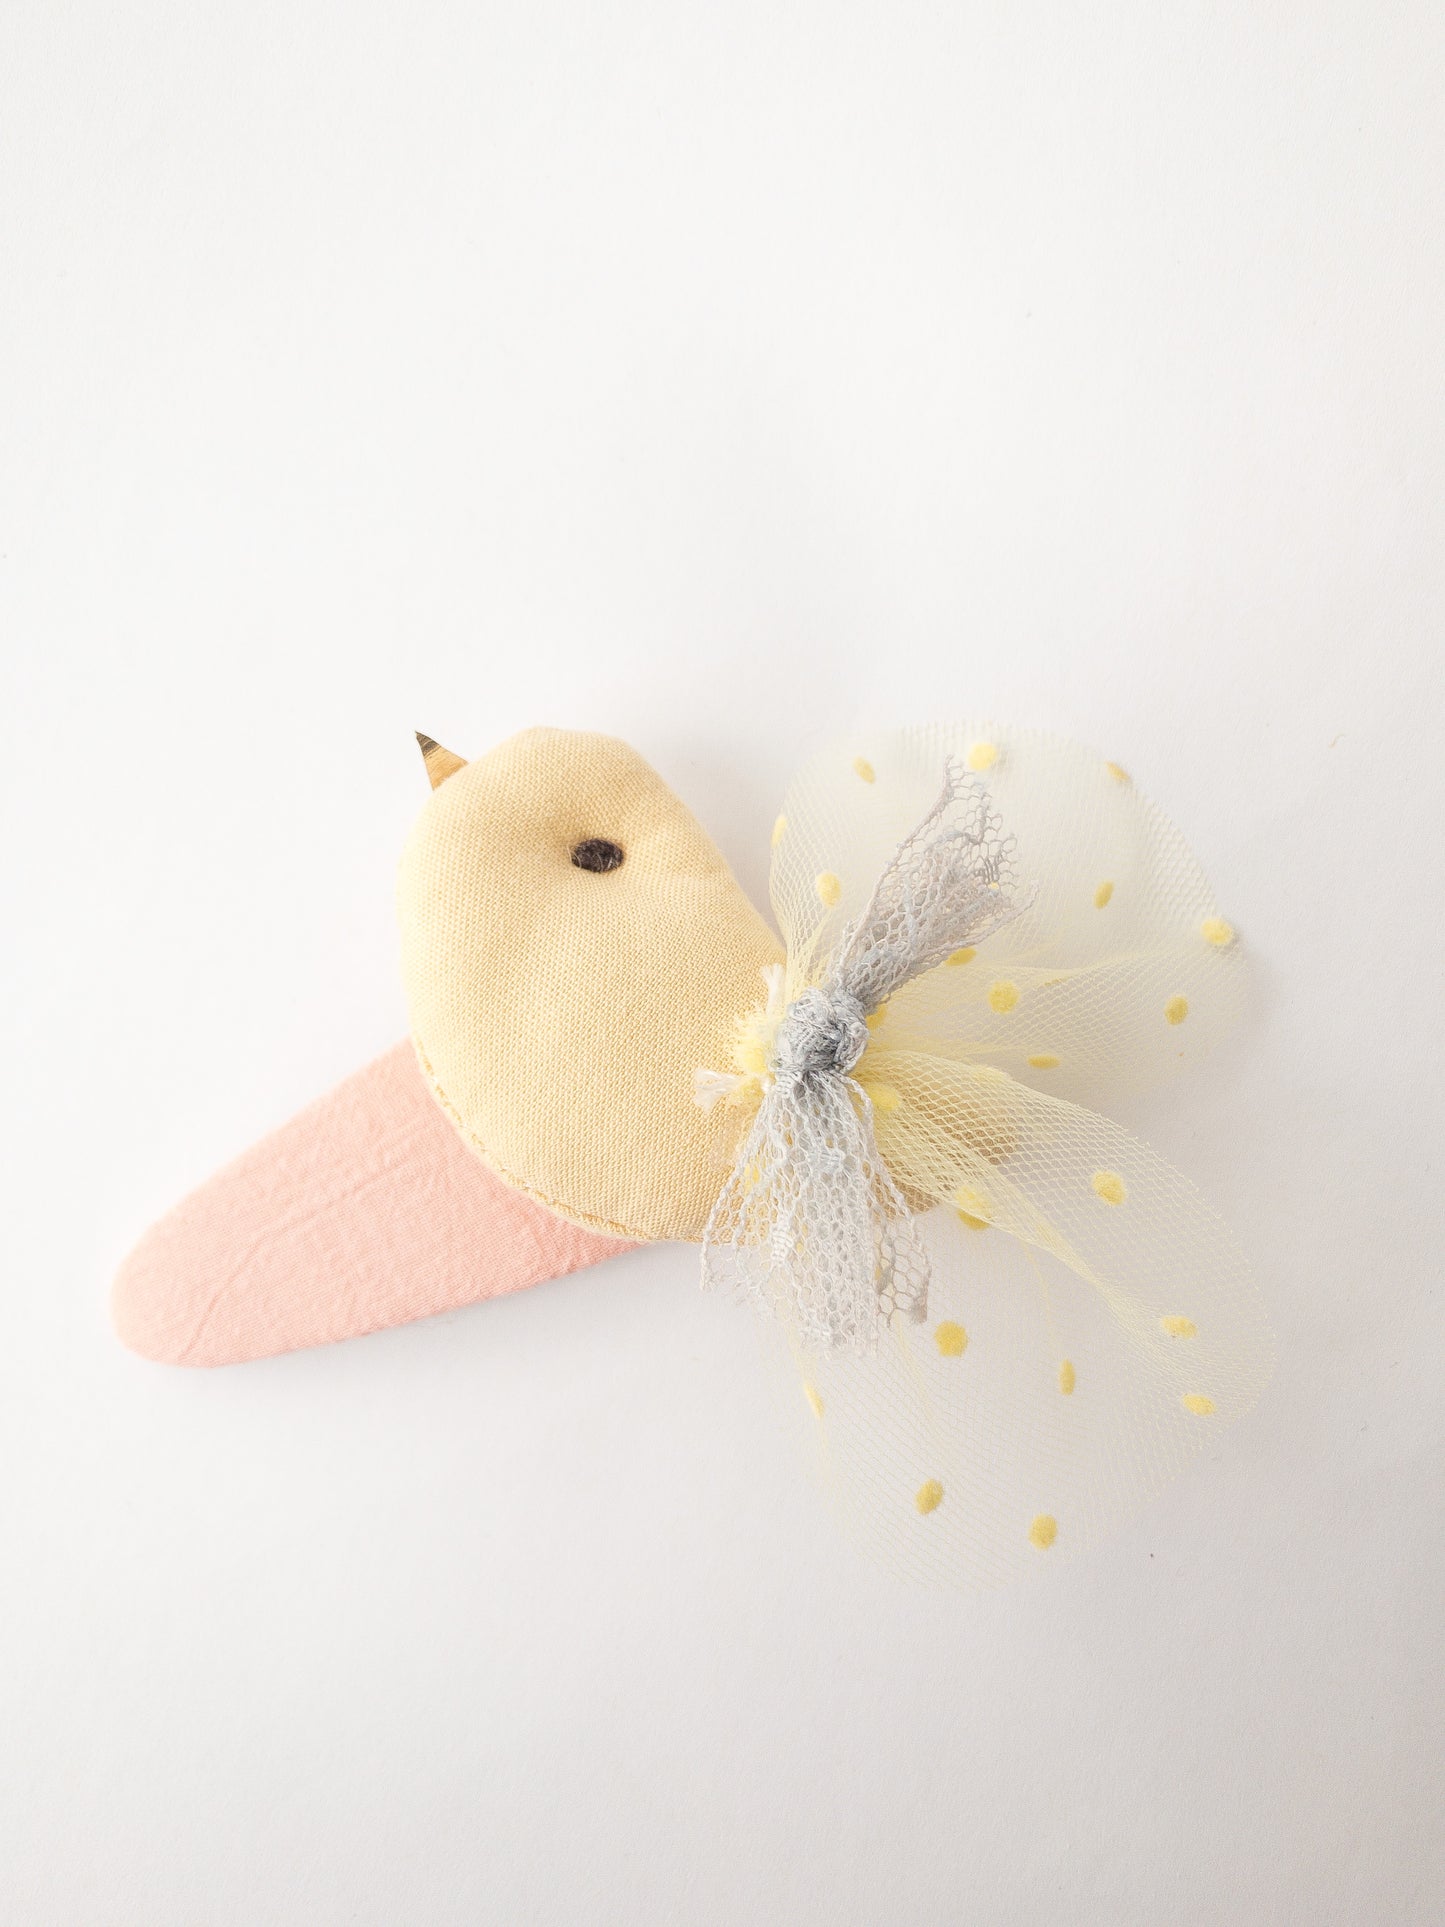 The sweetest plush bird in hair clip form! This snap clip is covered in fabric and decorated with a cute plush bird which has lace wings, a little lace bow, a stitched eye and metallic fabric beak. There really is no cuter hair clip!